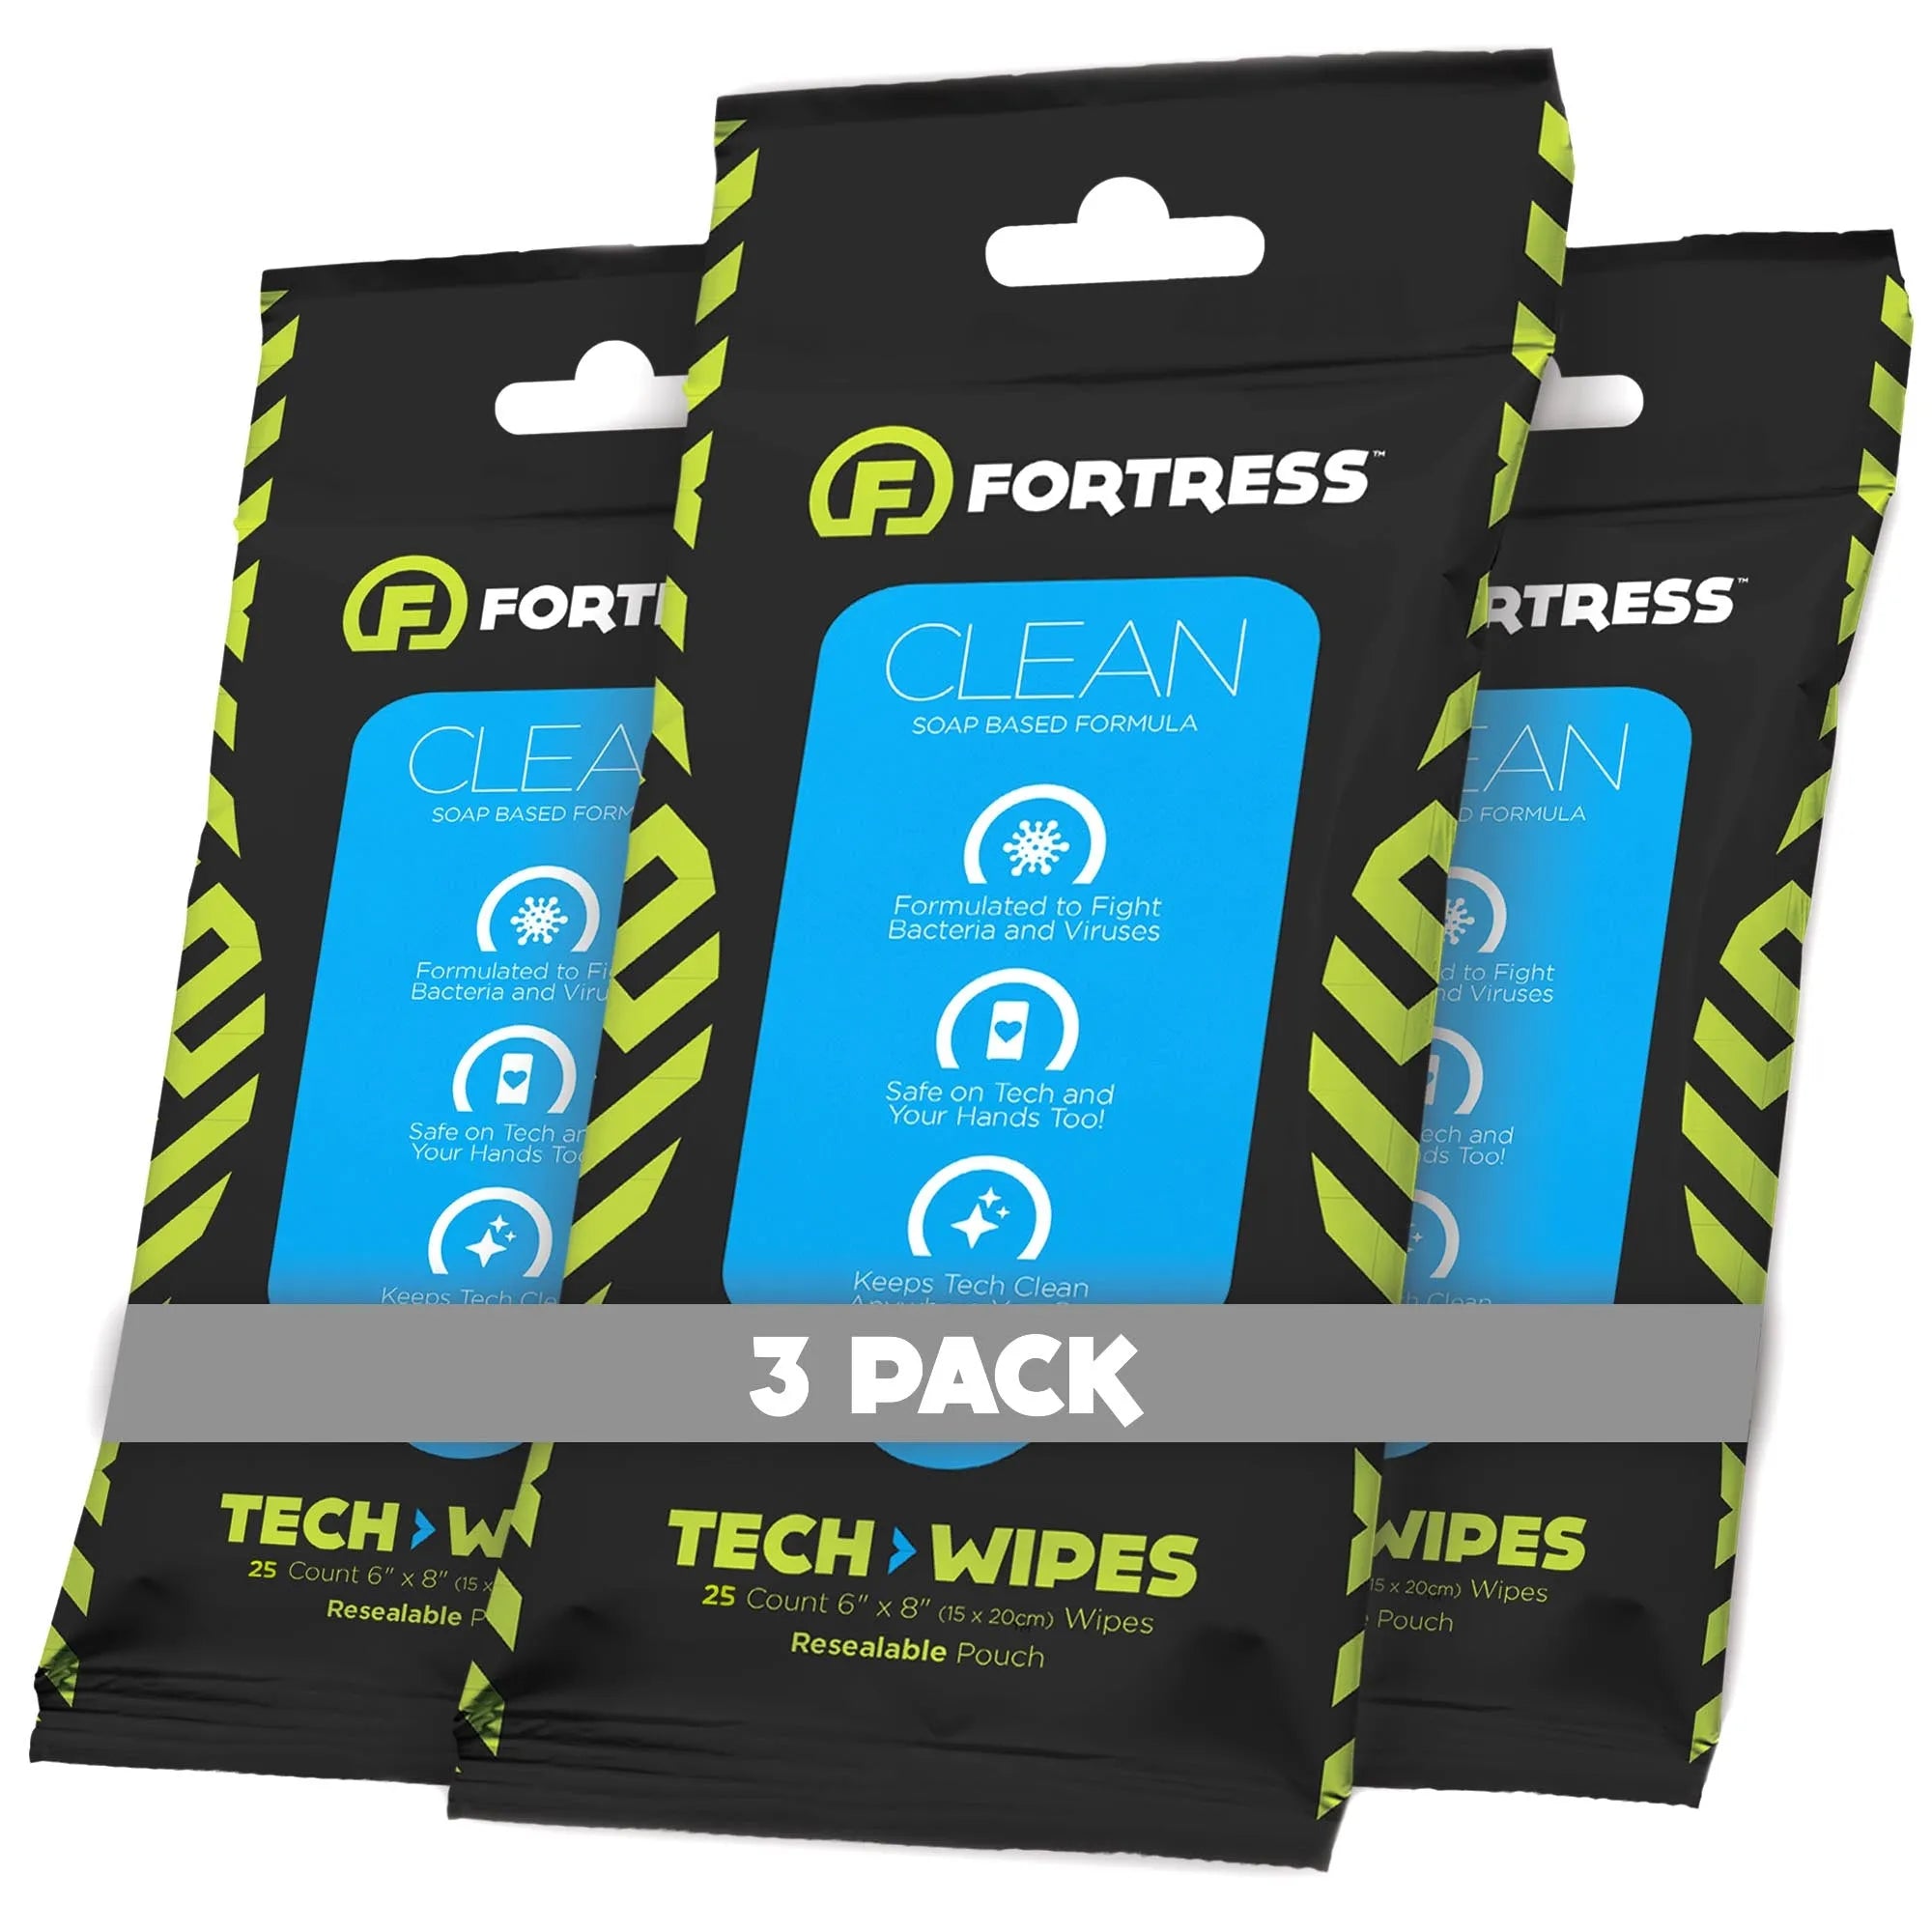 Fortress Tech Wipes (25 ct.) To-Go Disinfecting Wipes for Smartphones 3-PackYes Scooch Clean